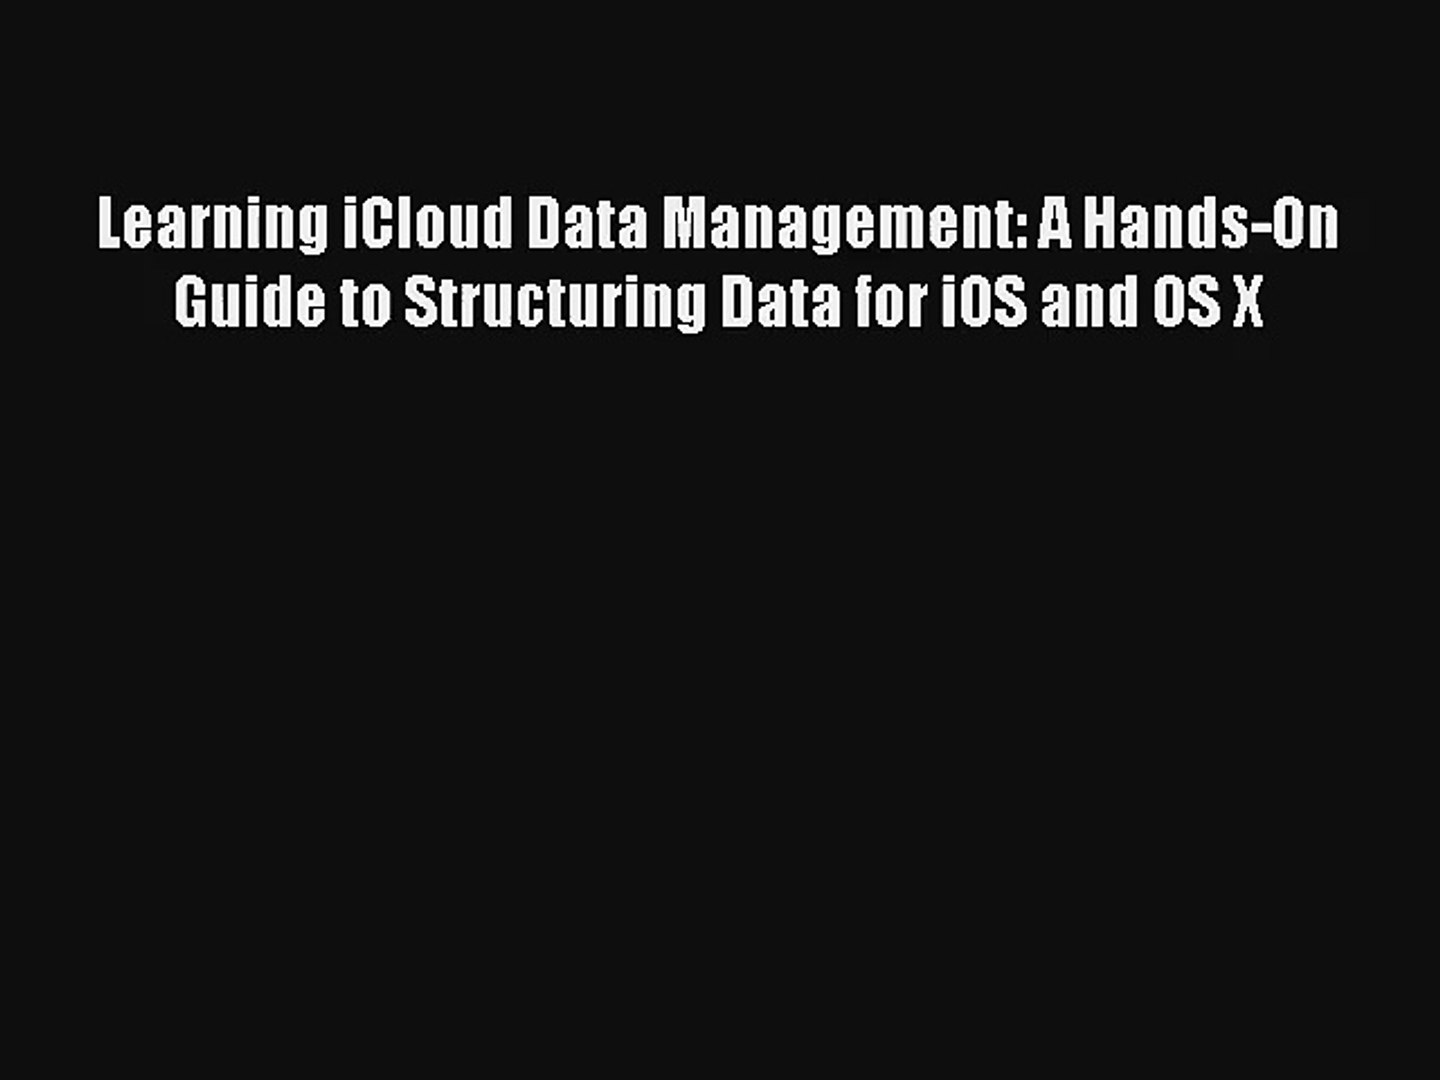 Learning iCloud Data Management: A Hands-On Guide to Structuring Data for iOS and OS X Read